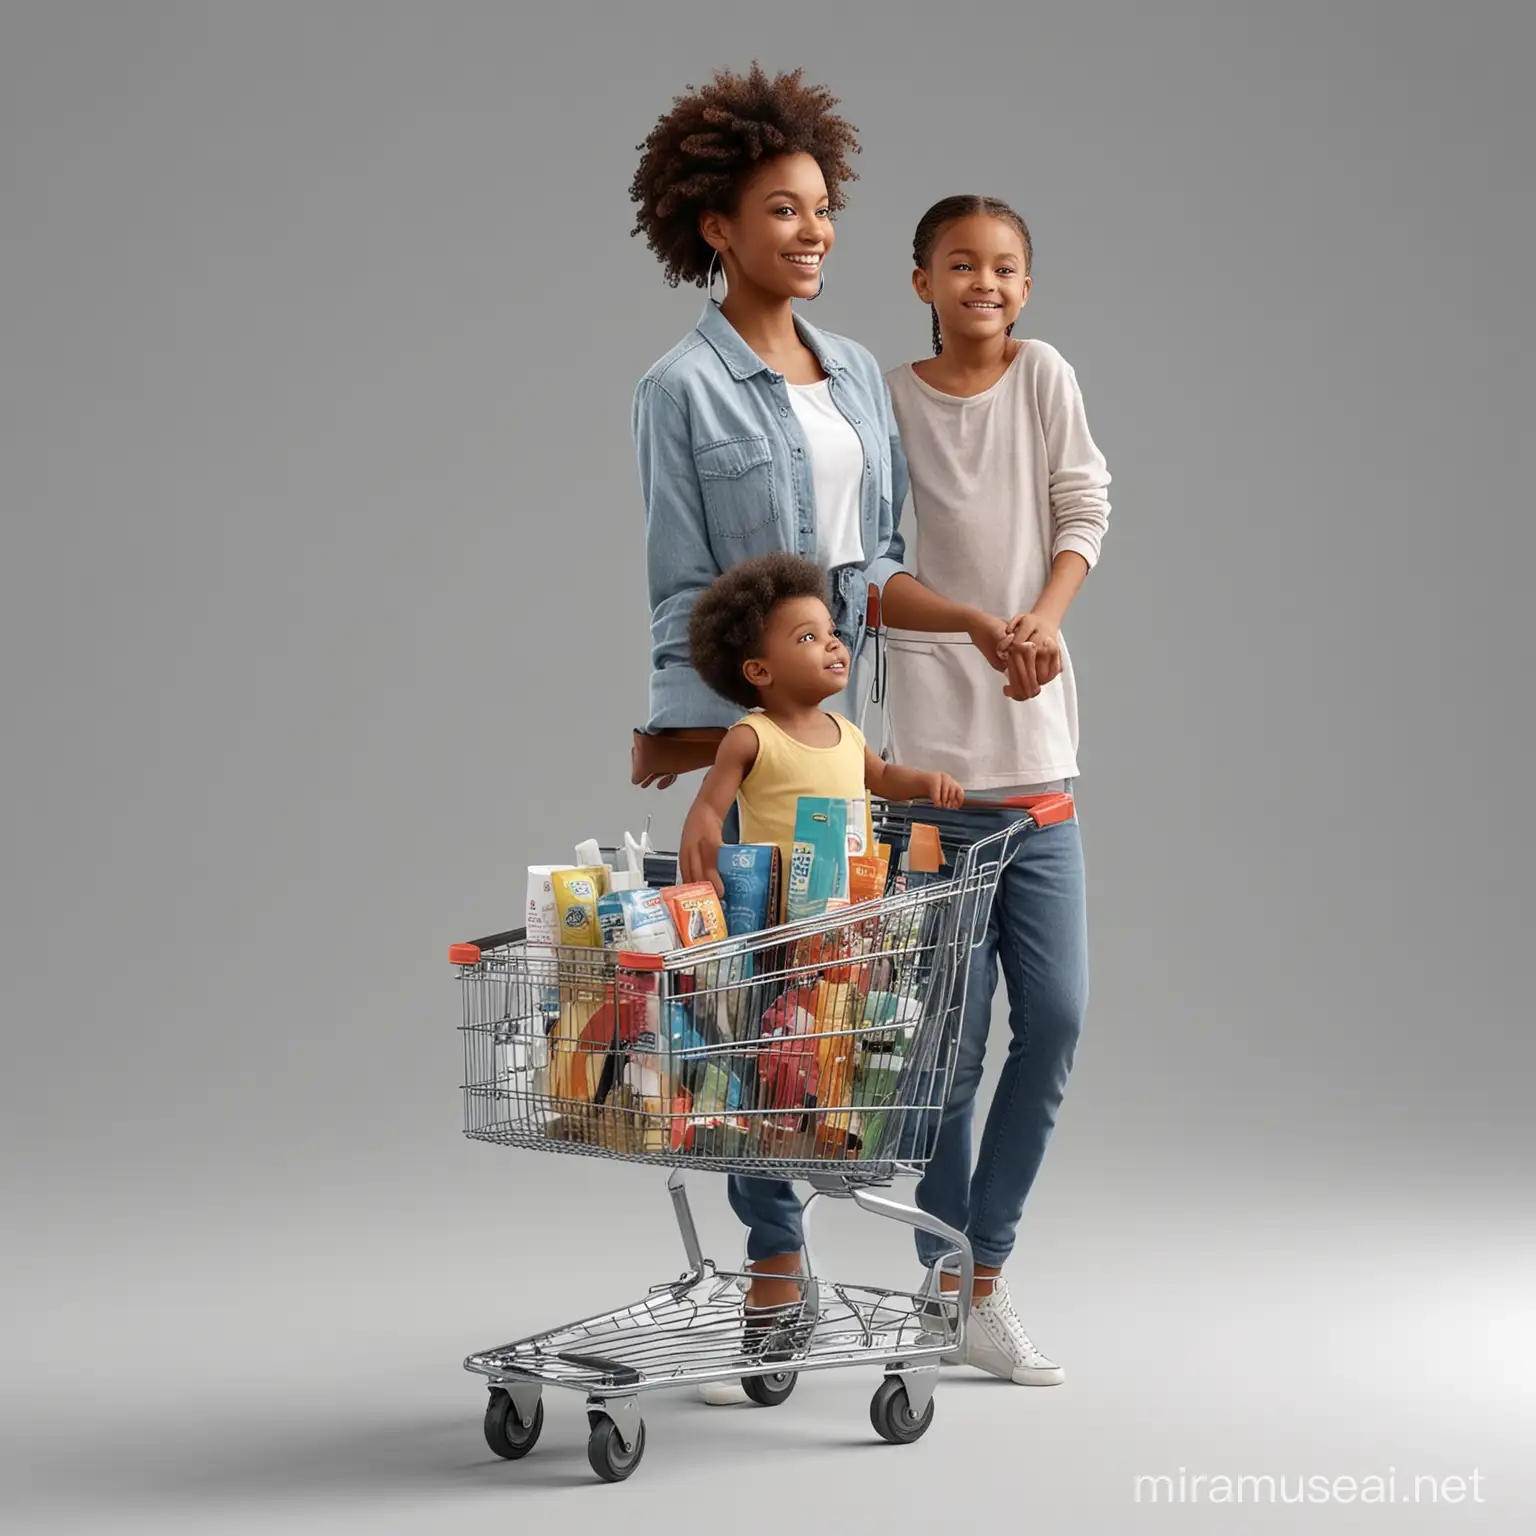 Happy Young Black Woman Shopping with Child